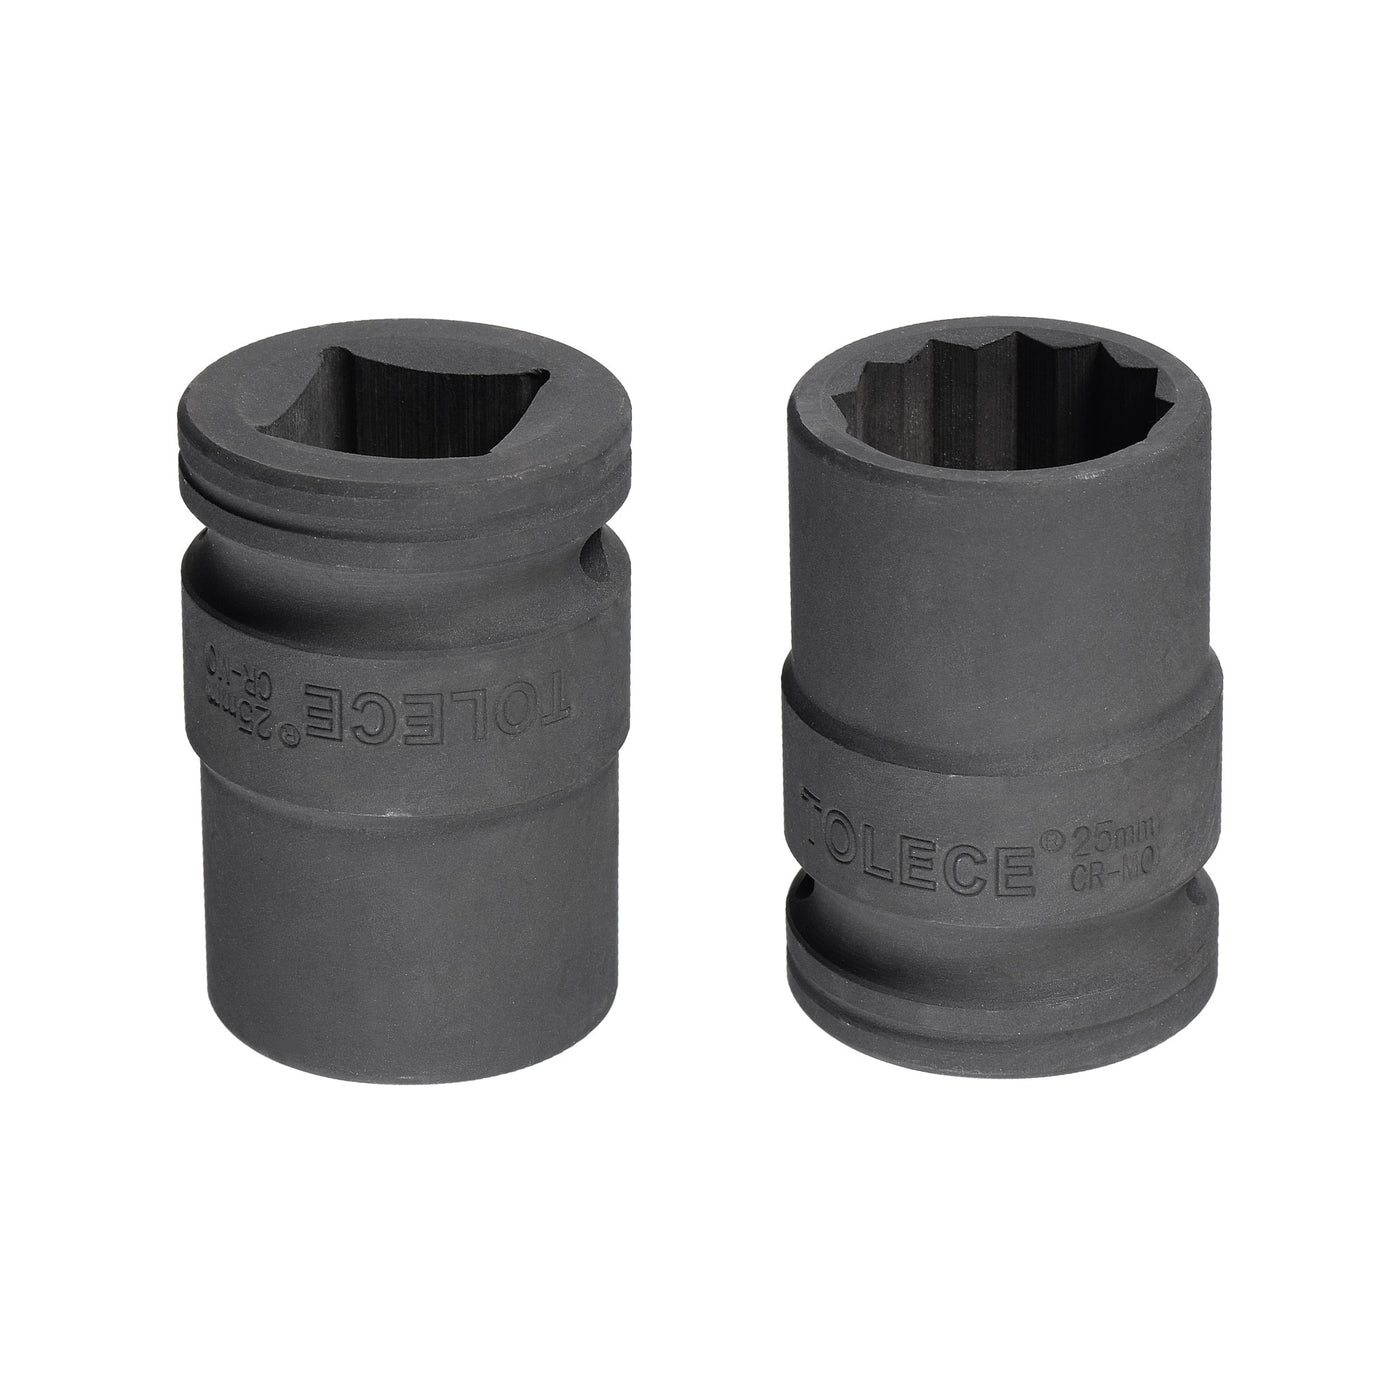 uxcell Uxcell 3/4" Drive 25mm 12-Point Impact Socket, CR-MO Steel 56mm Length, Standard Metric